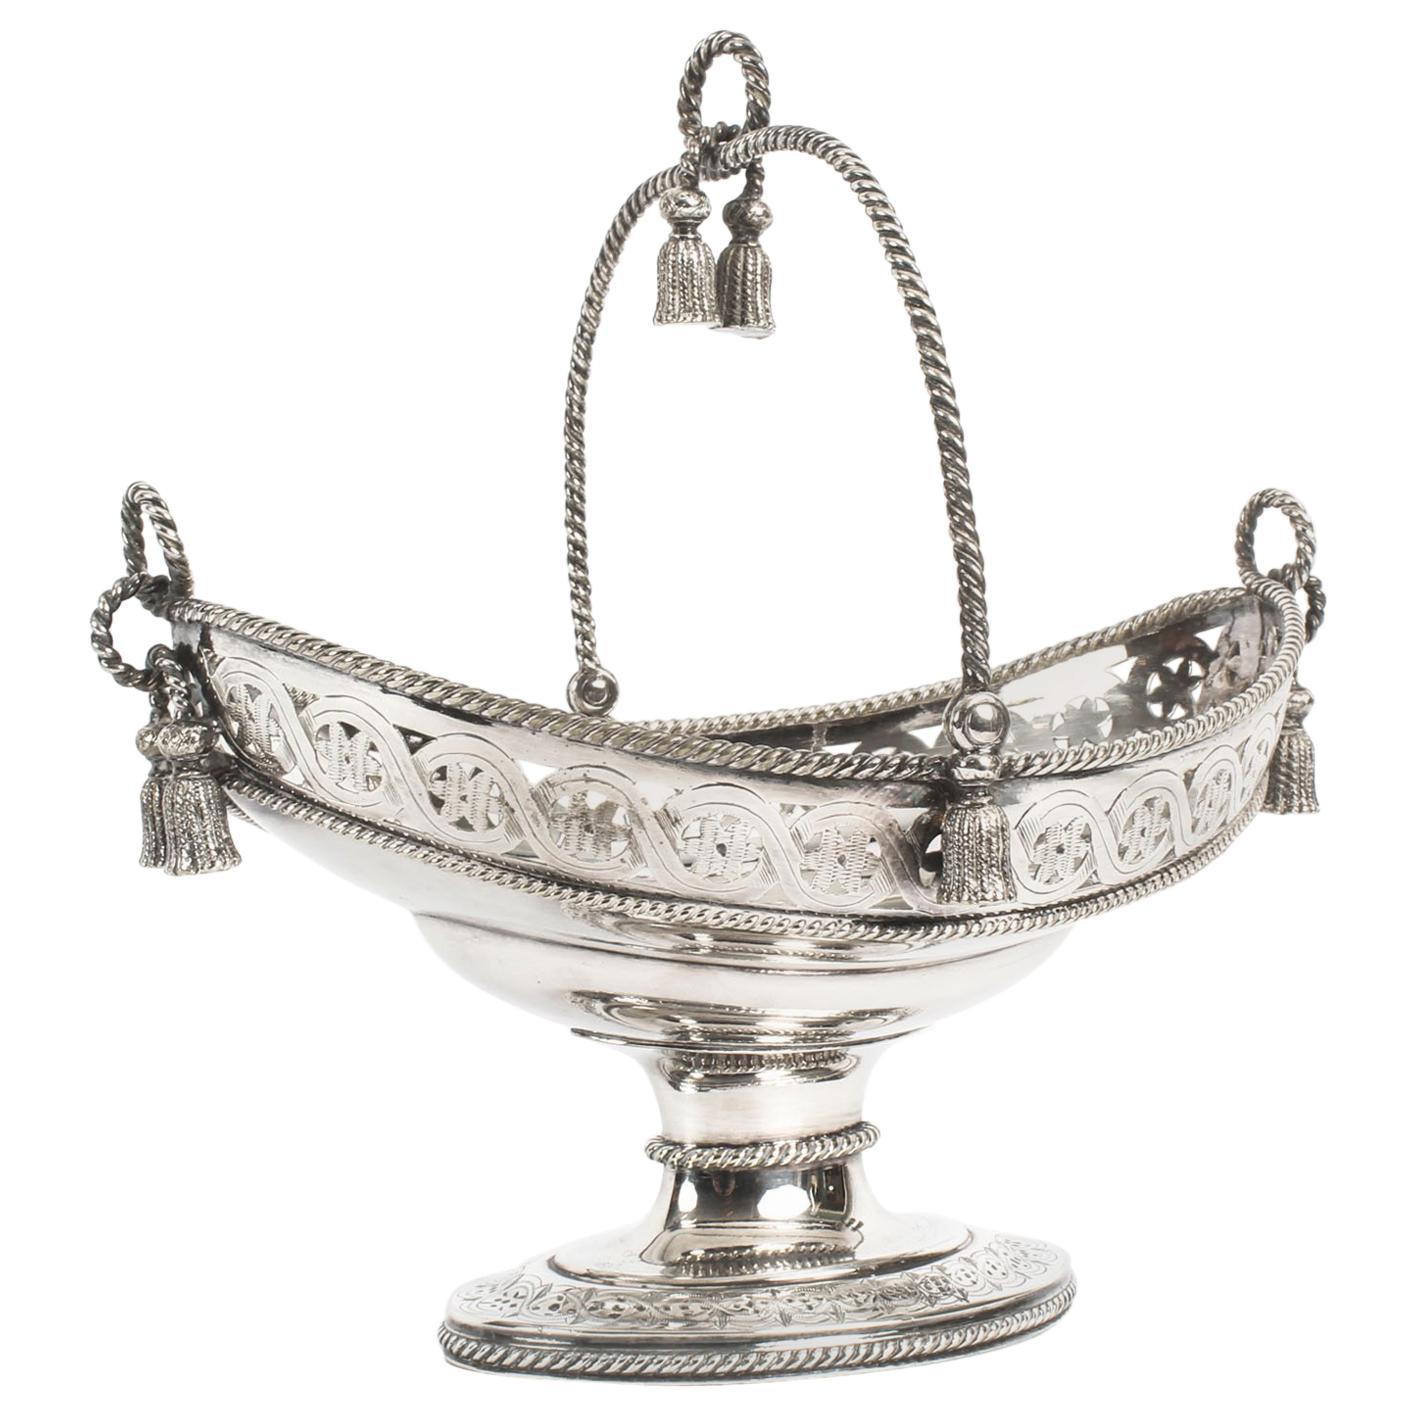 Antique Victorian Oval Silver Plated Sweet Basket, 19th Century